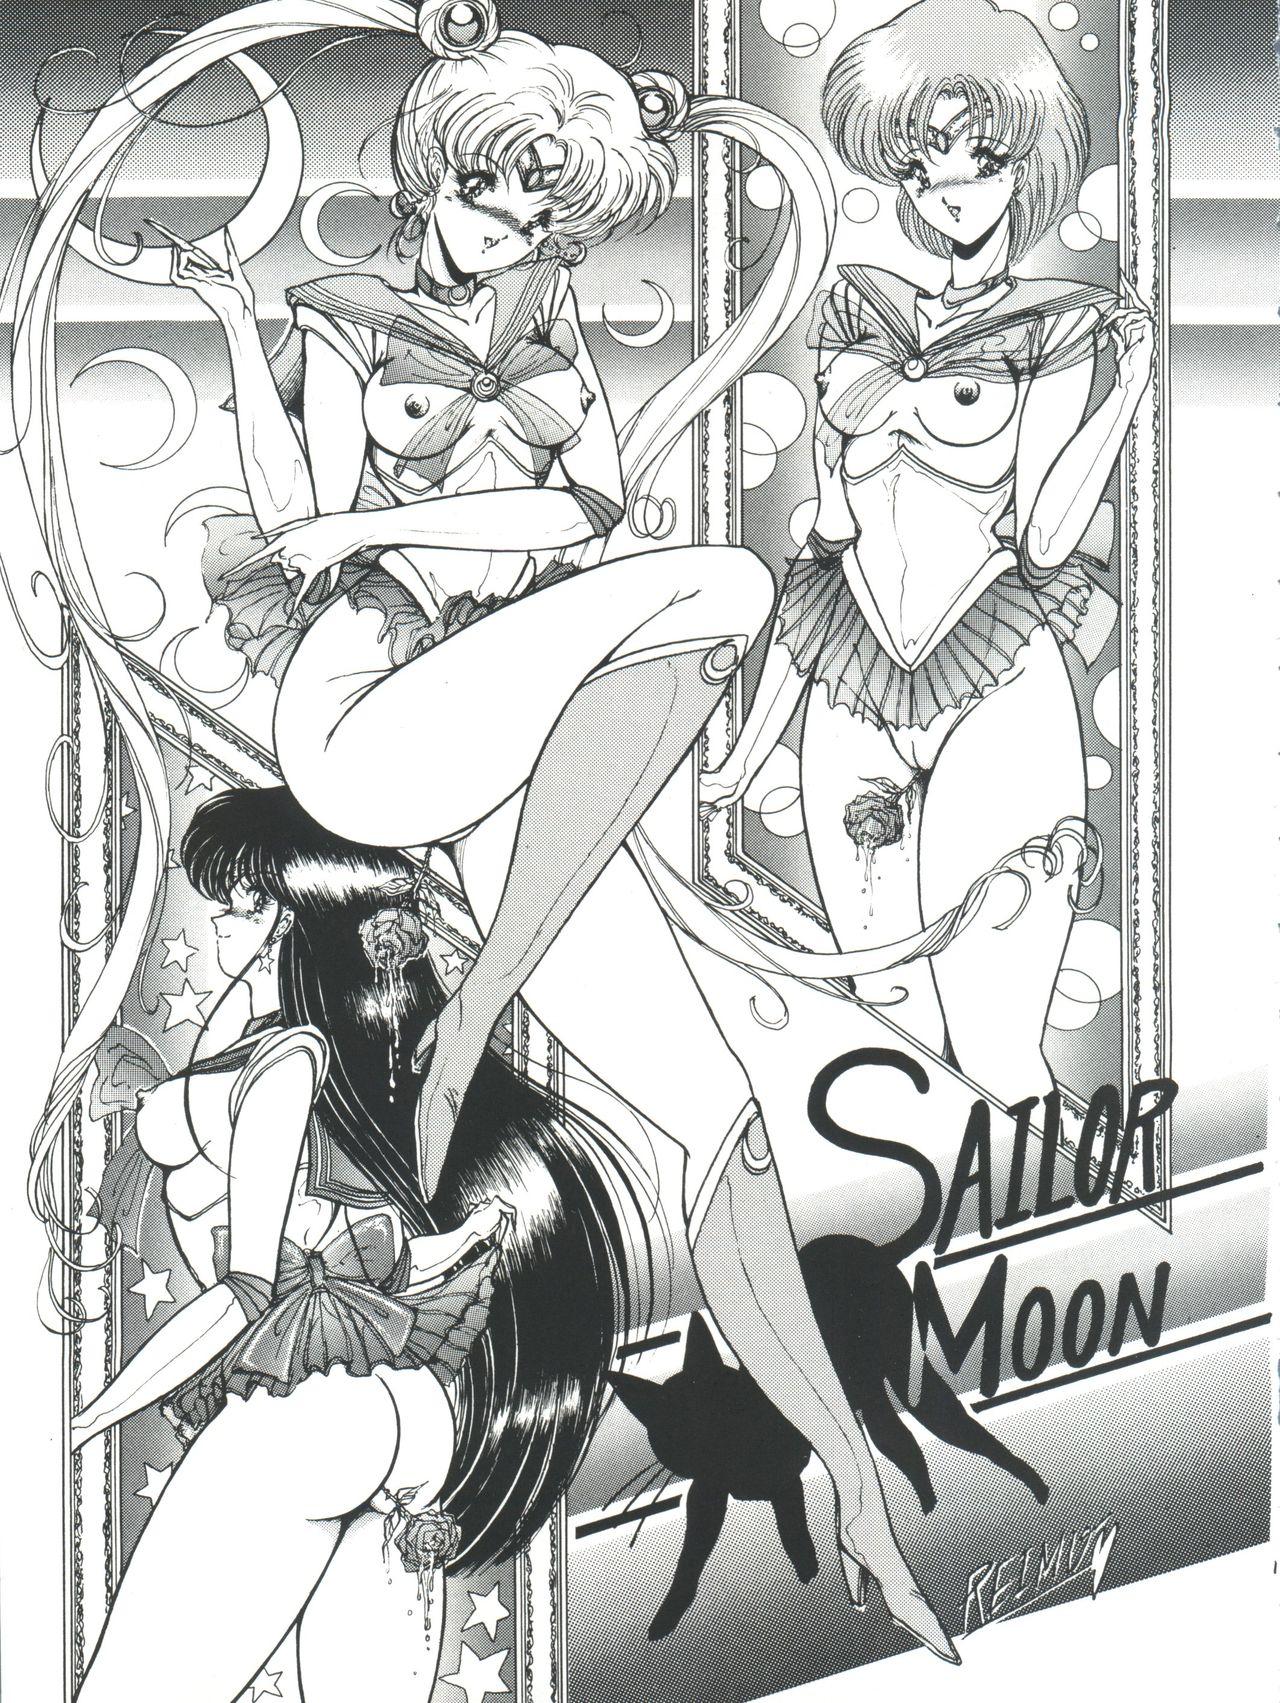 18yearsold PLUS-Y Vol. 9 - Sailor moon Fortune quest Boobies - Page 12